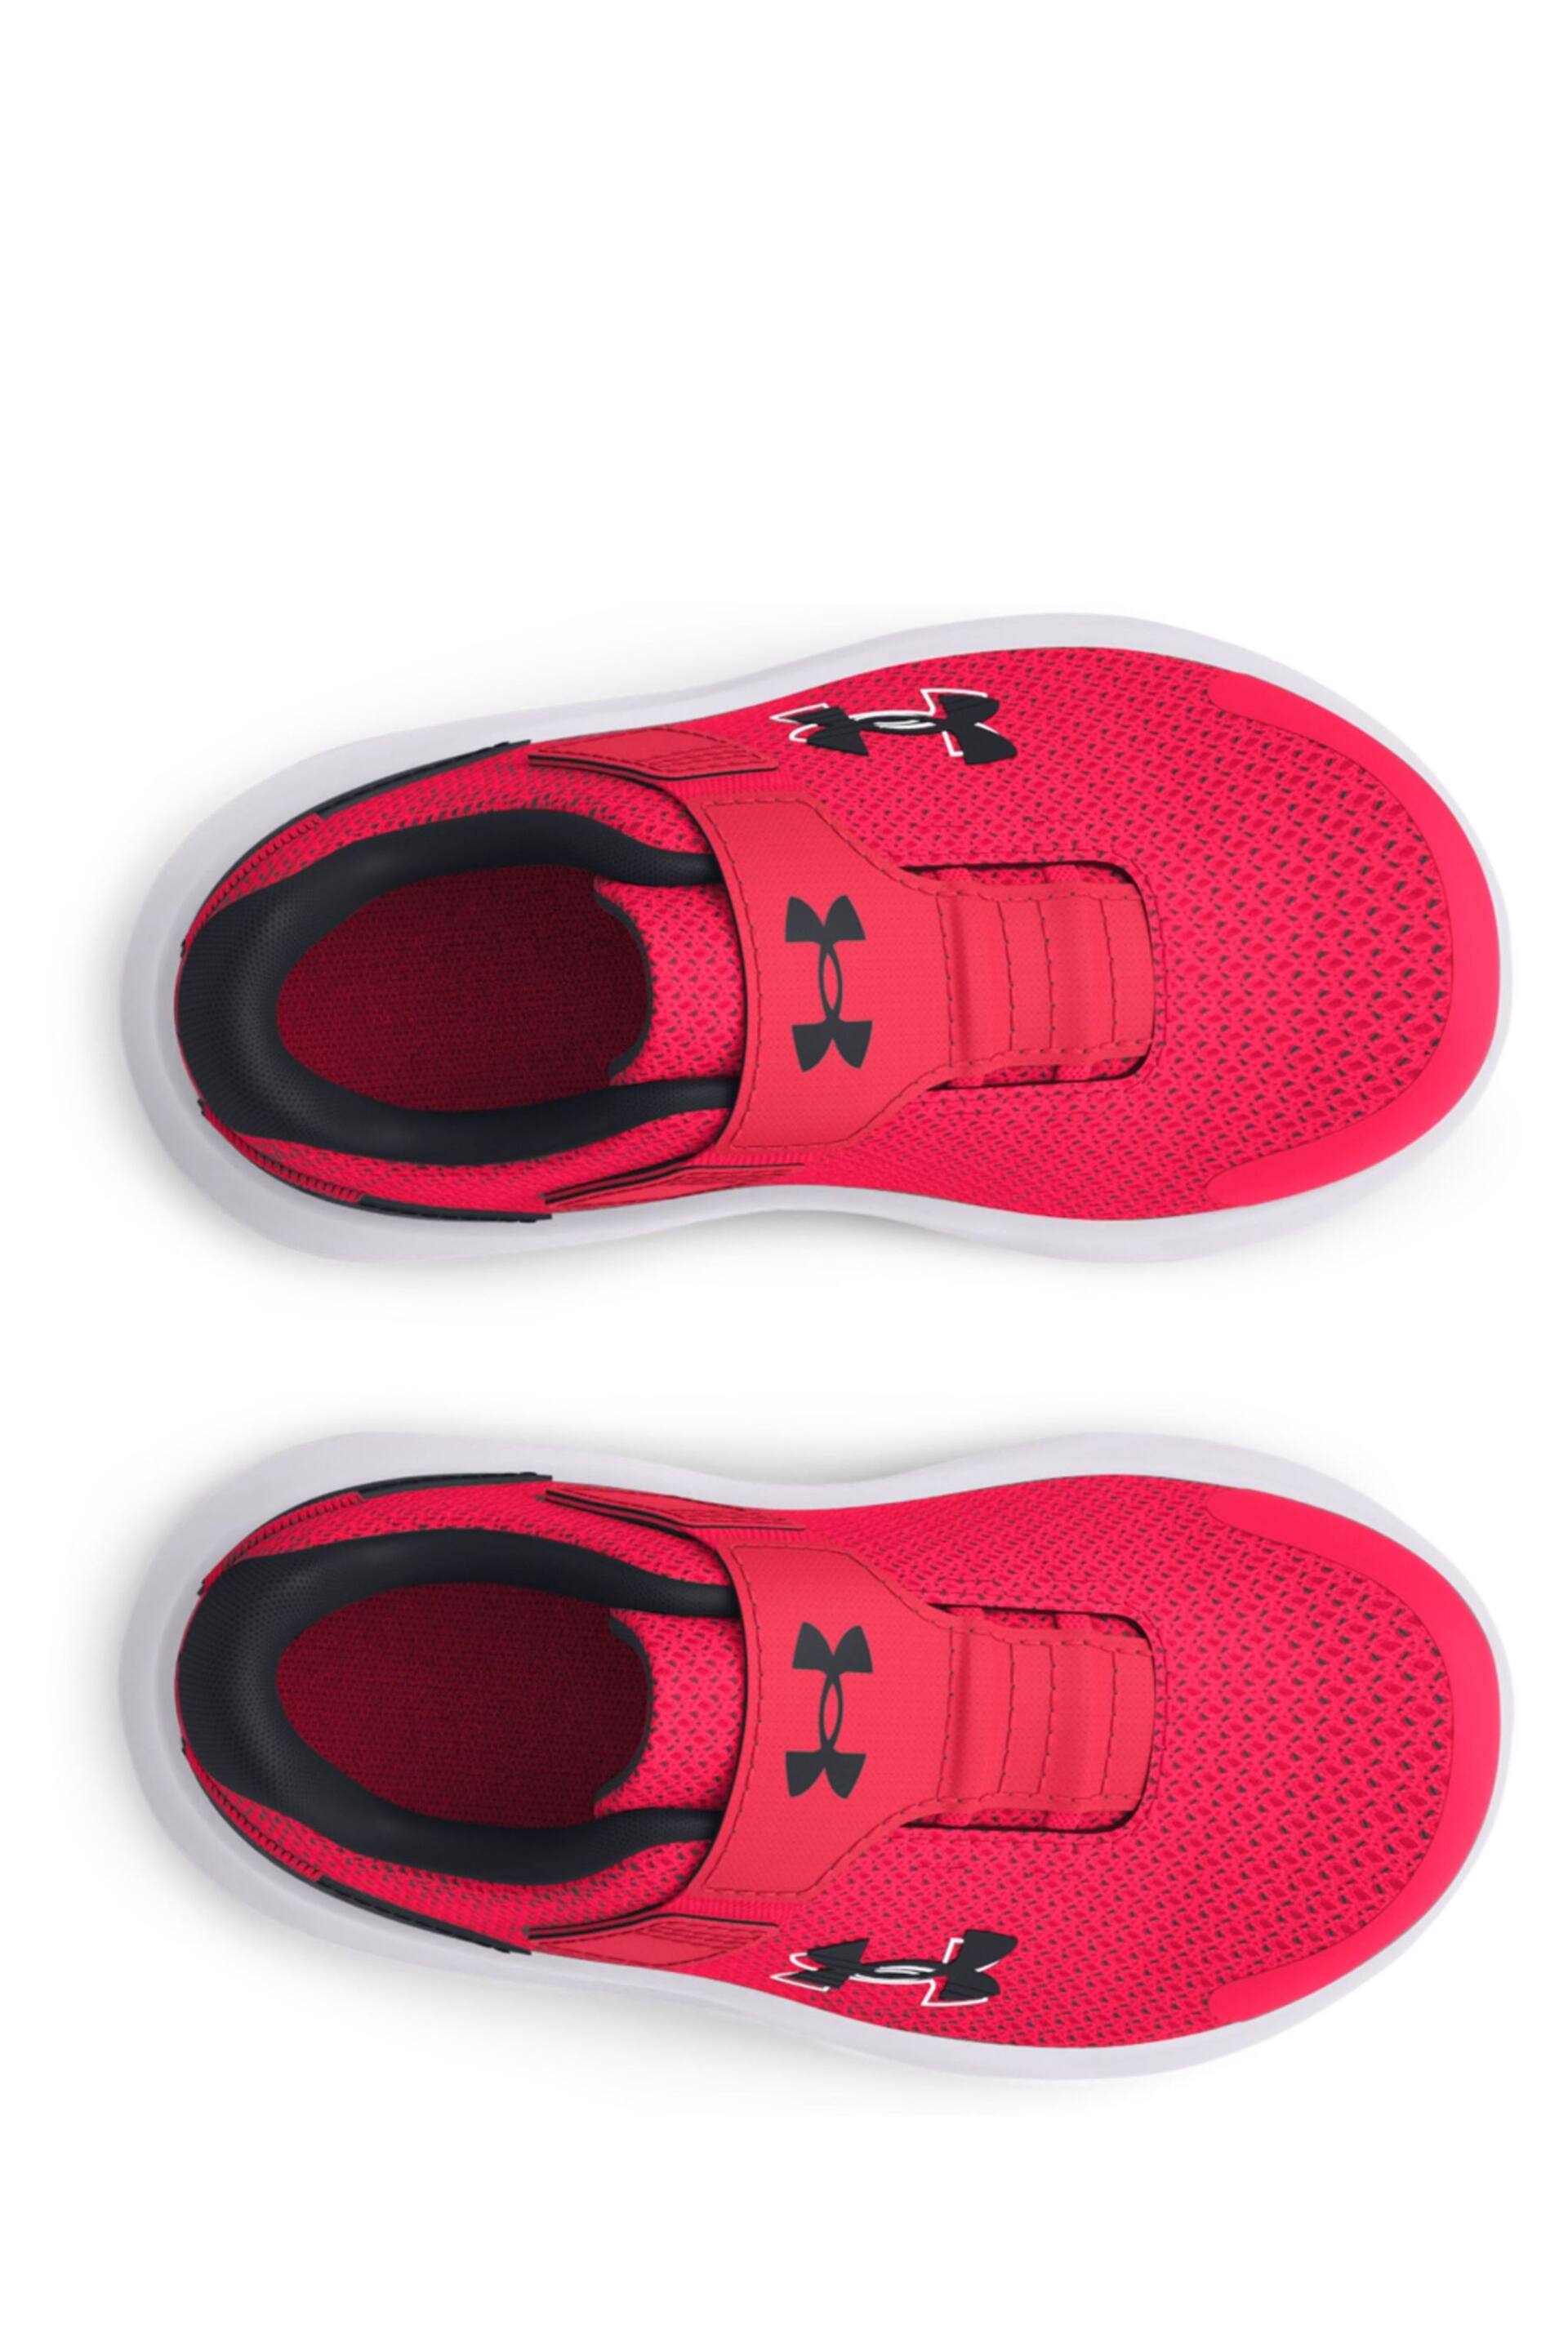 Under Armour Red Surge 4 Trainers - Image 5 of 6